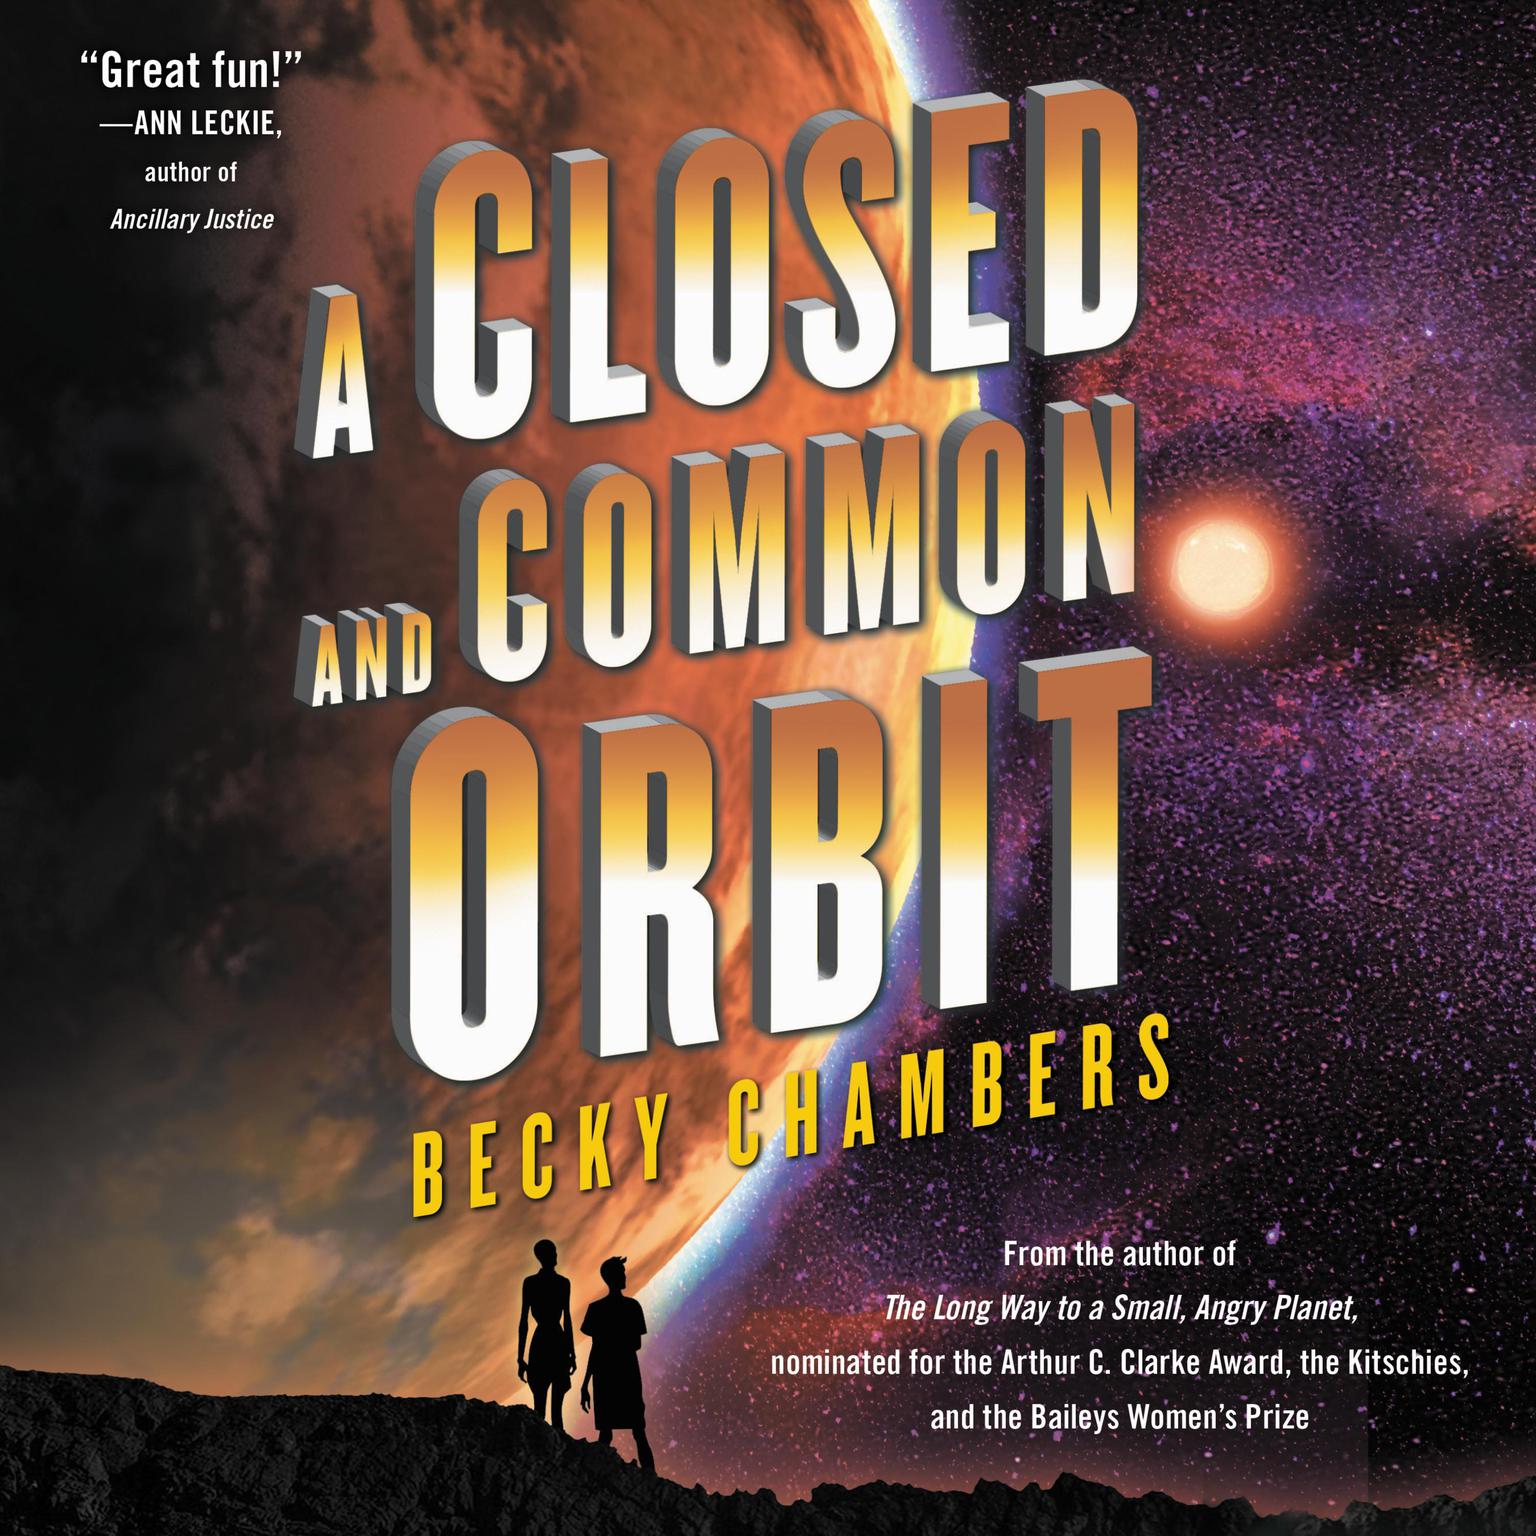 Rachel Dulude, Becky Chambers: A Closed and Common Orbit (AudiobookFormat, 2017, Tantor Audio)